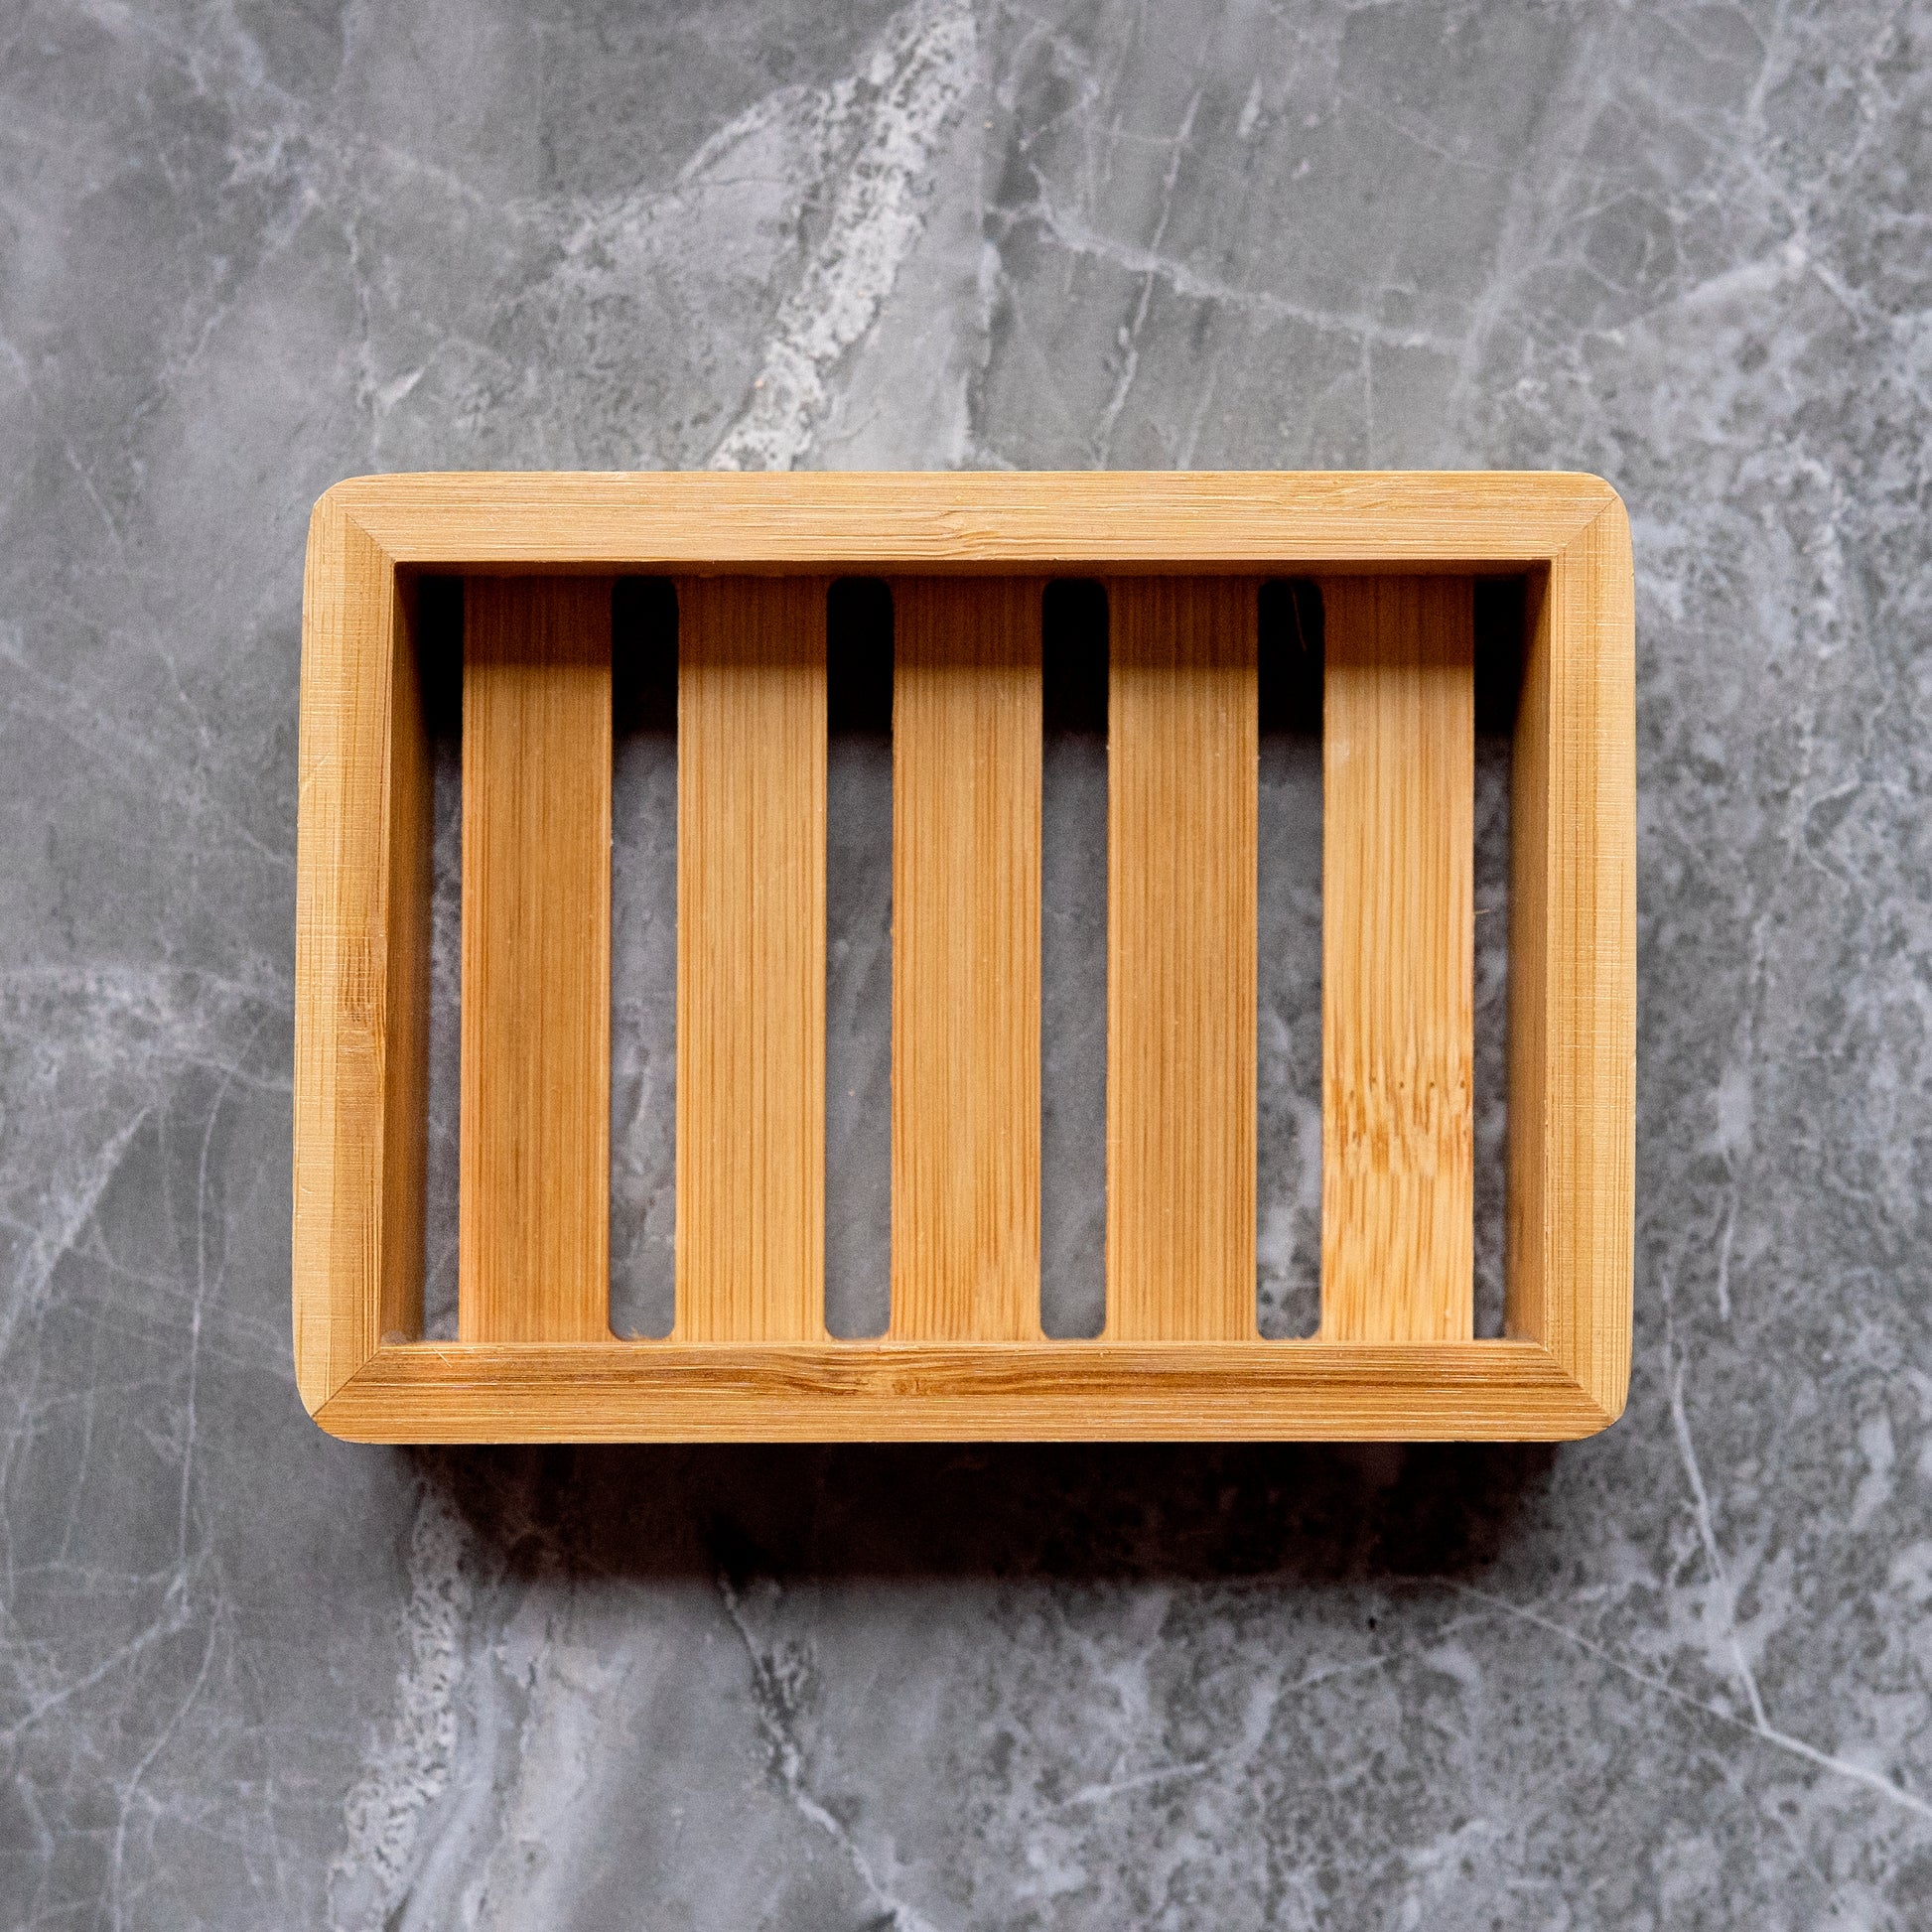 image of bamboo soap dish on dark marble background